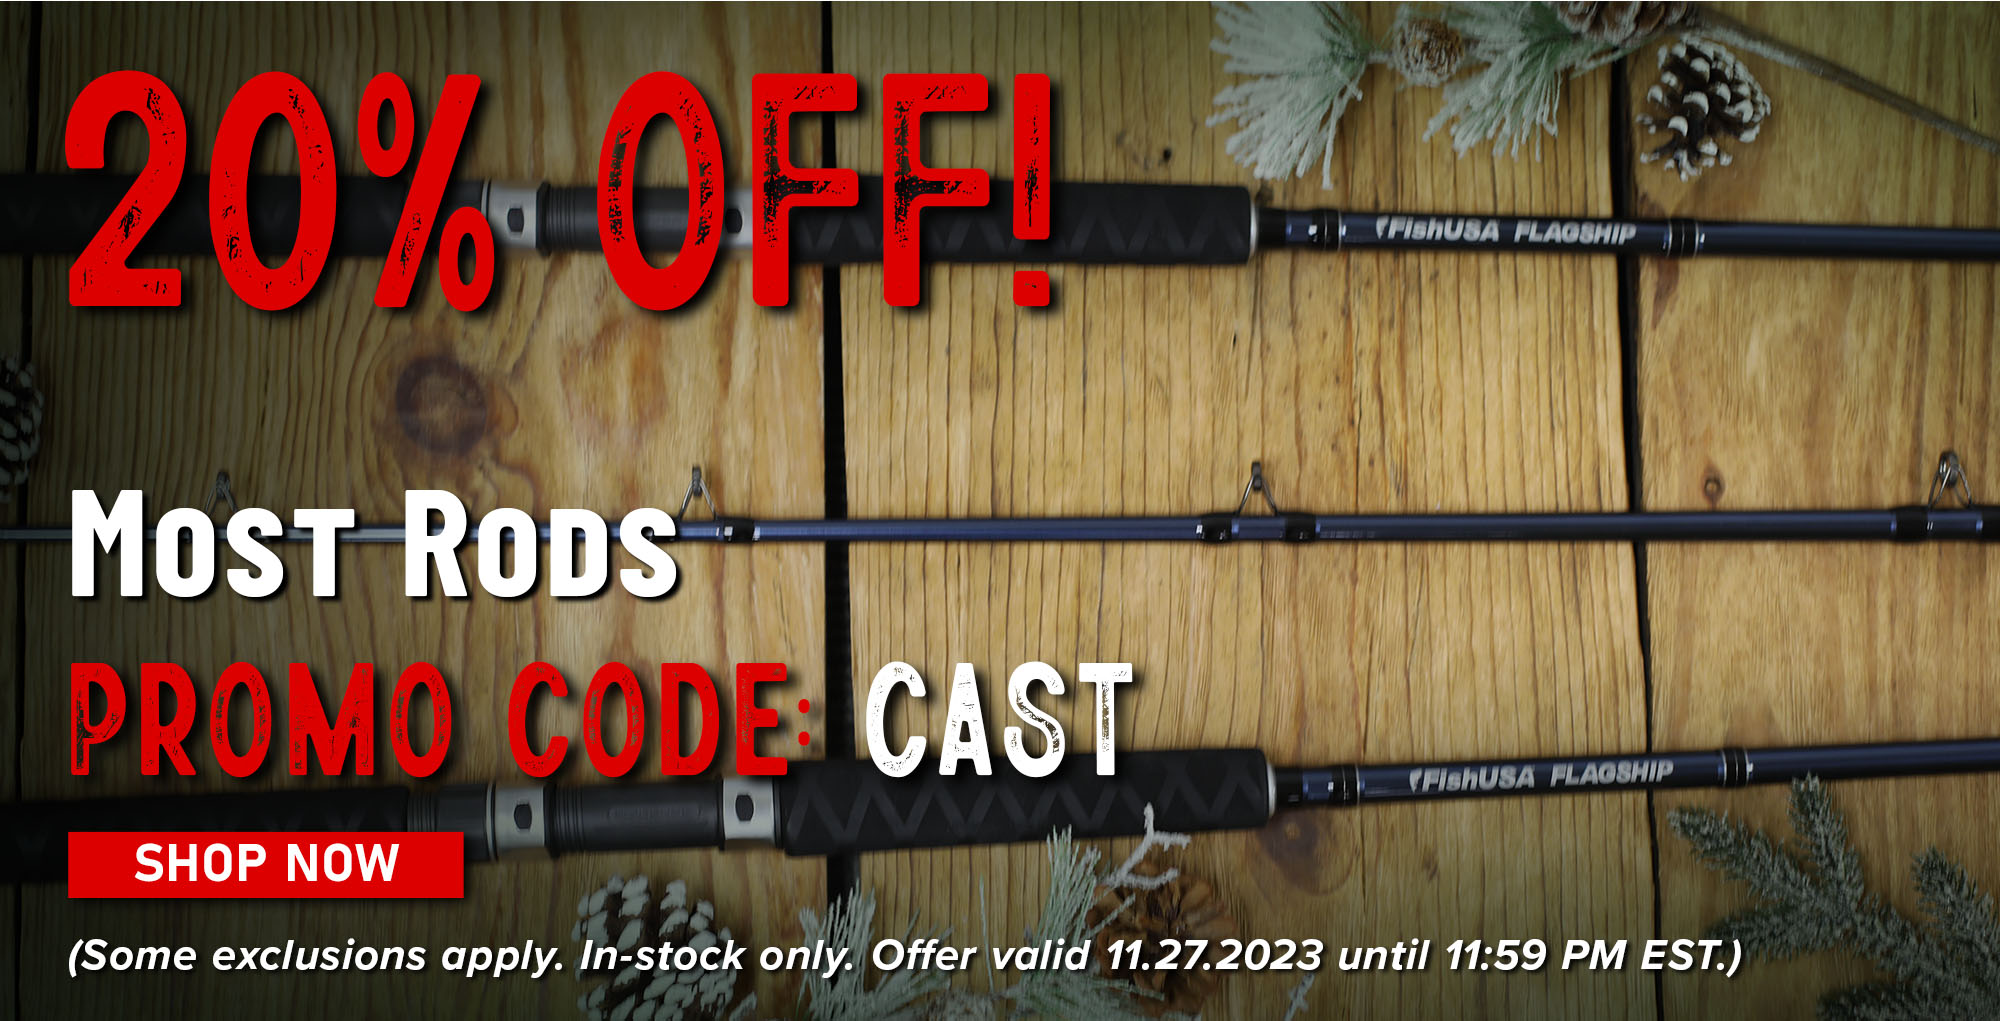 20% Off! Most Rods Promo Code: CAST Shop Now (Some exclusions apply. In-stock only. Offer valid 11.27.2023 until 11:59 PM EST.)